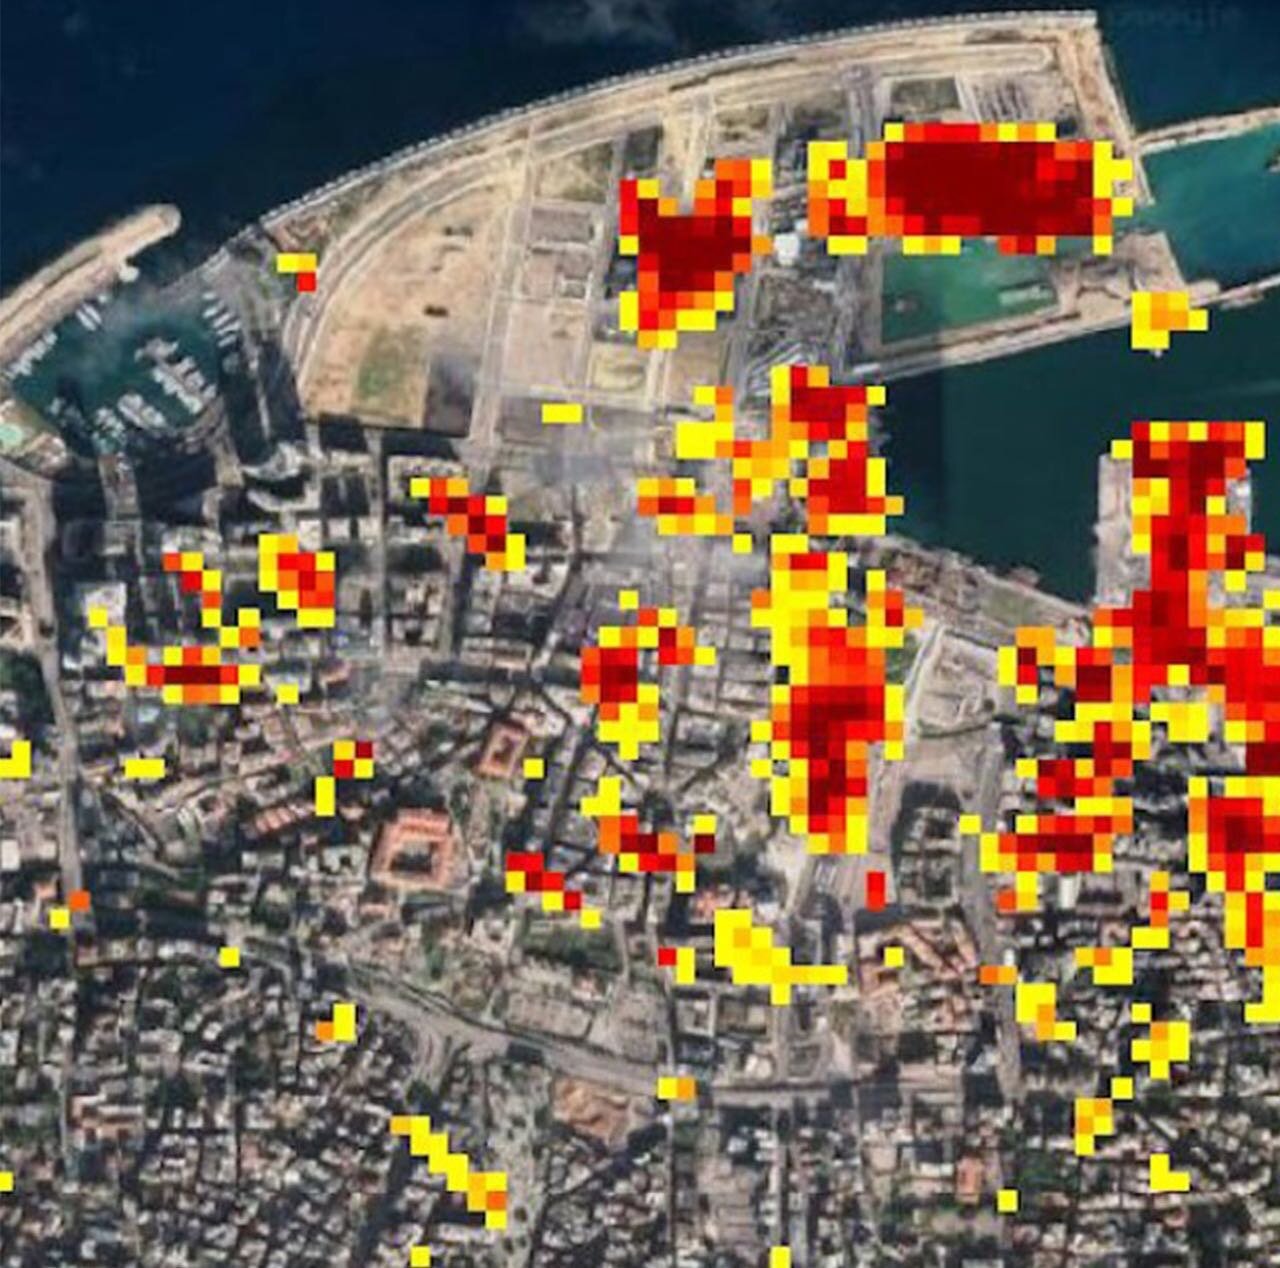 NASA mapping of the damage done due to the recent explosion in Beirut. 
Part of the discussion with the @amakenplacemaking workshop discusses ways forward as well as challenges.

Topics that were brought up during the workshop are:

1- What to do reg